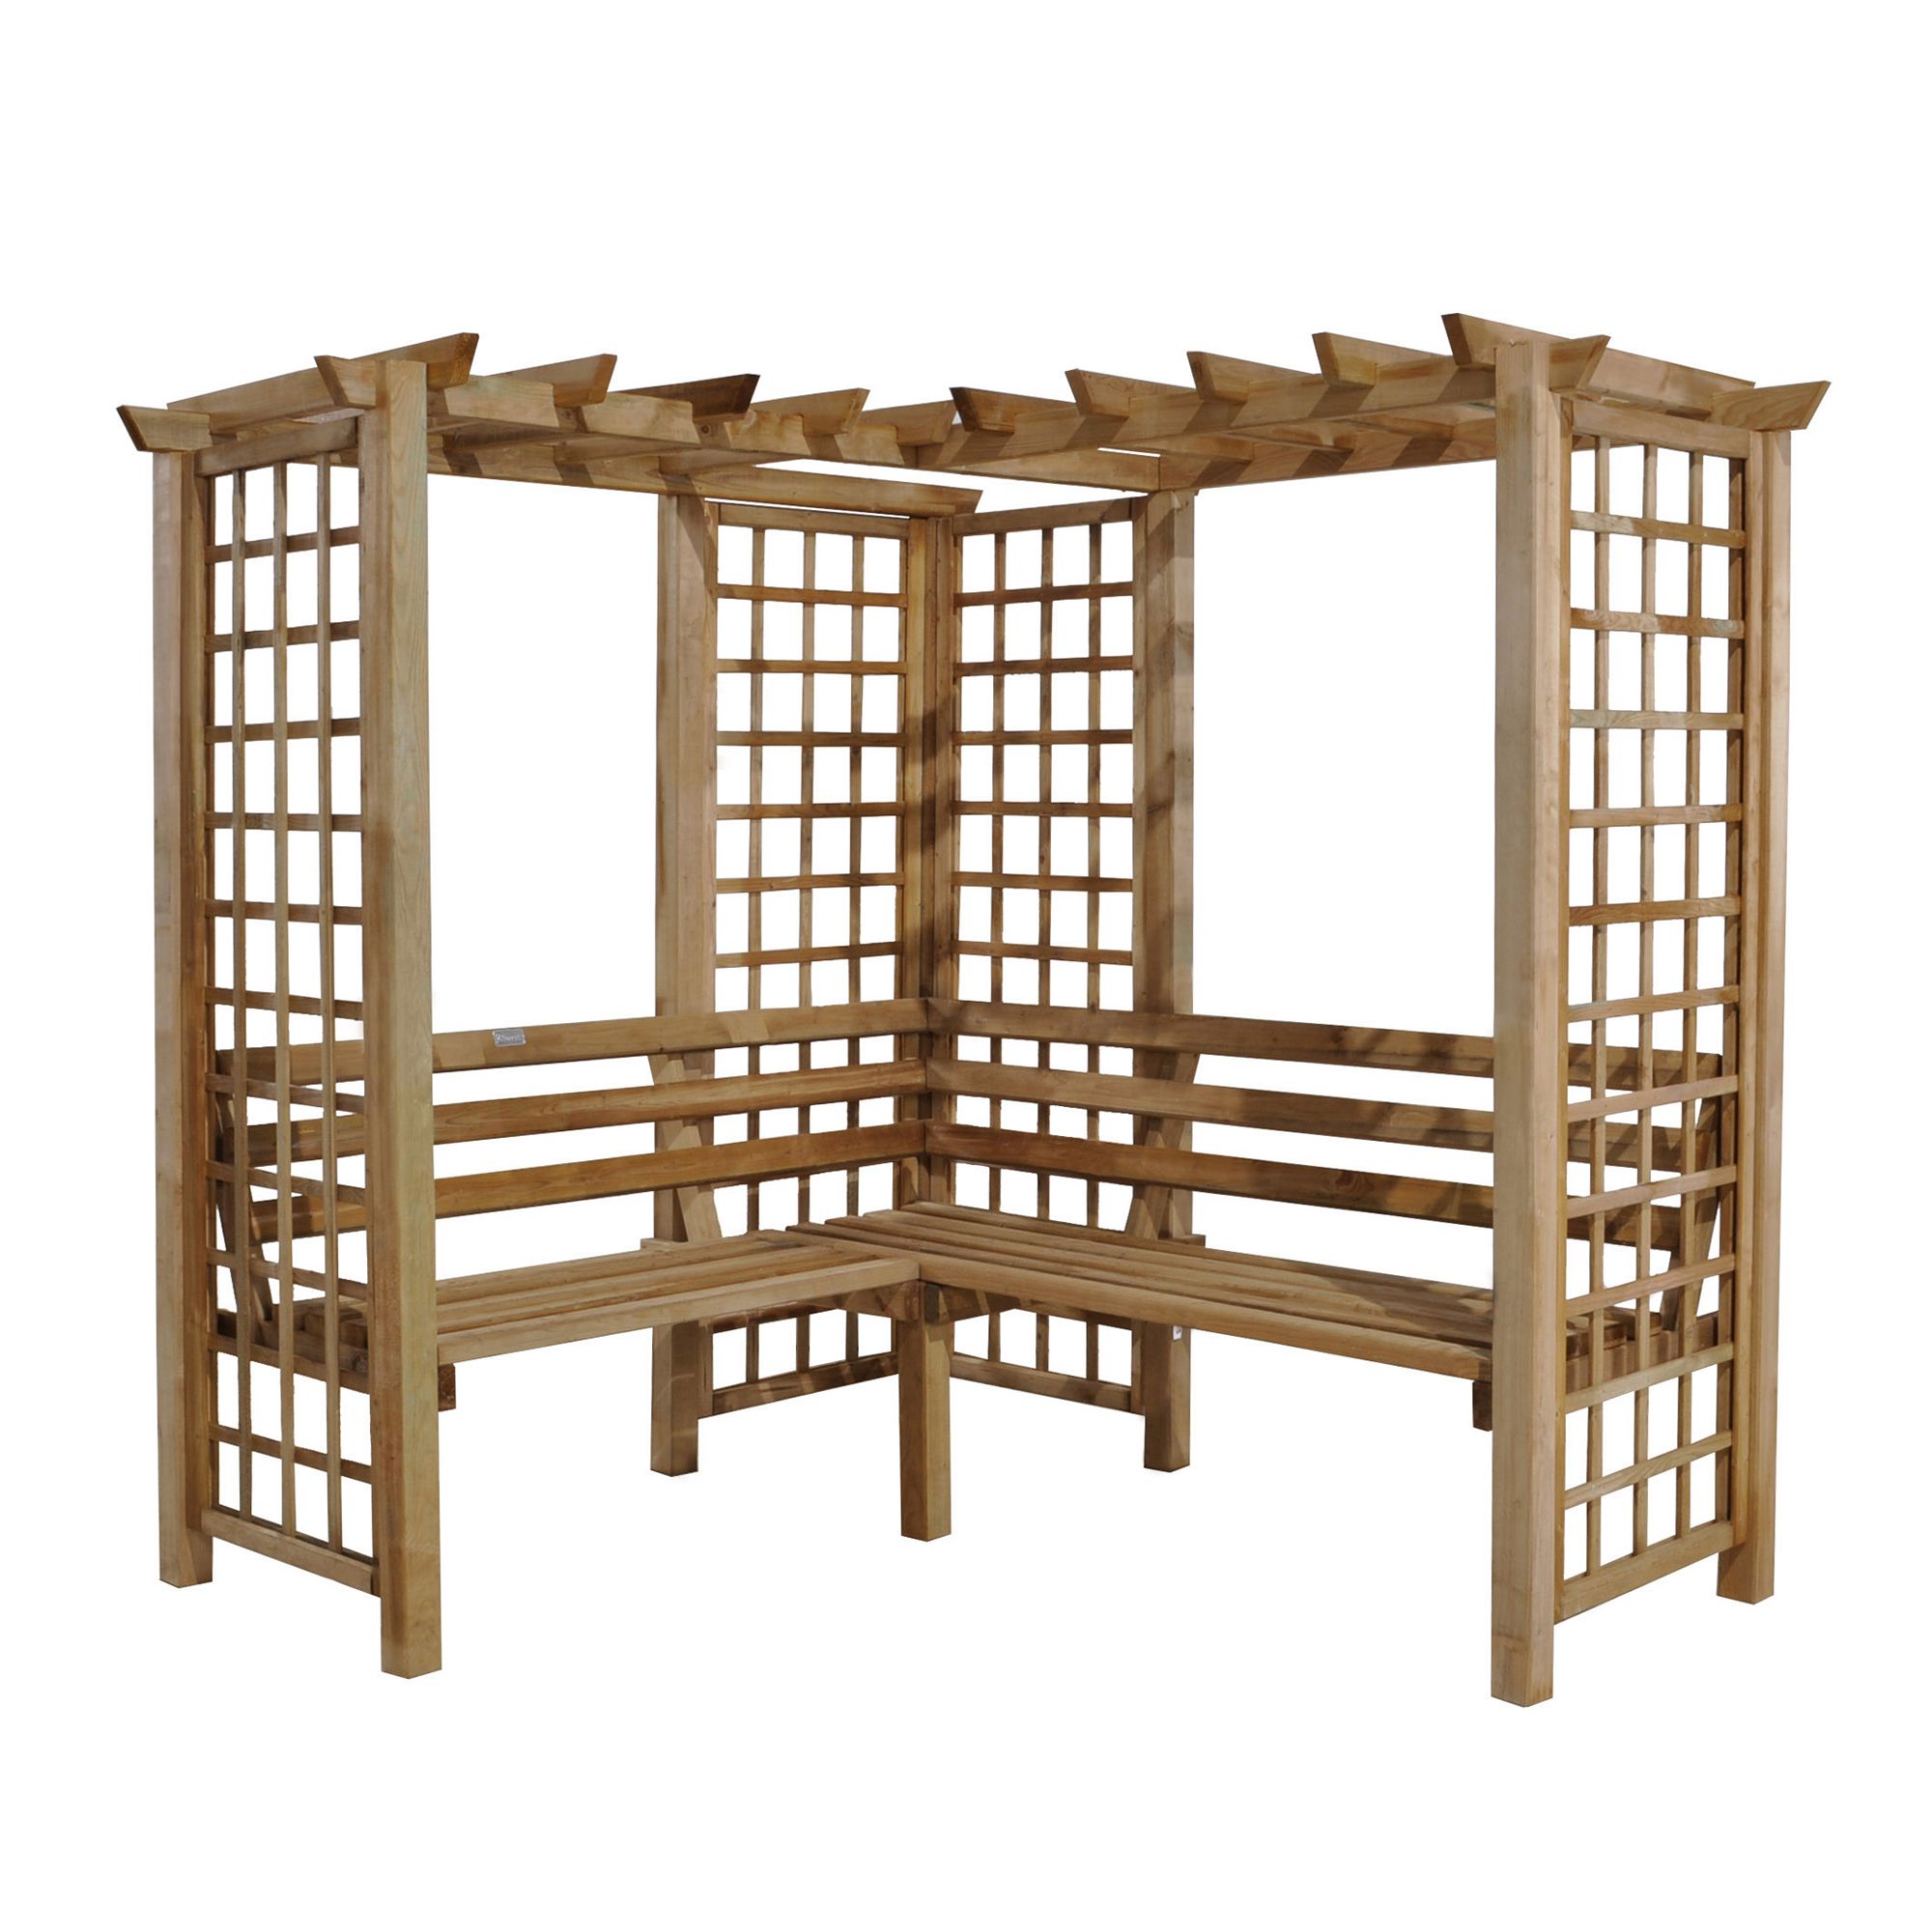 Forest Garden Sorrento Trellis Arbour, (H)2170mm (W)1990mm (D)2020mm - Assembly required